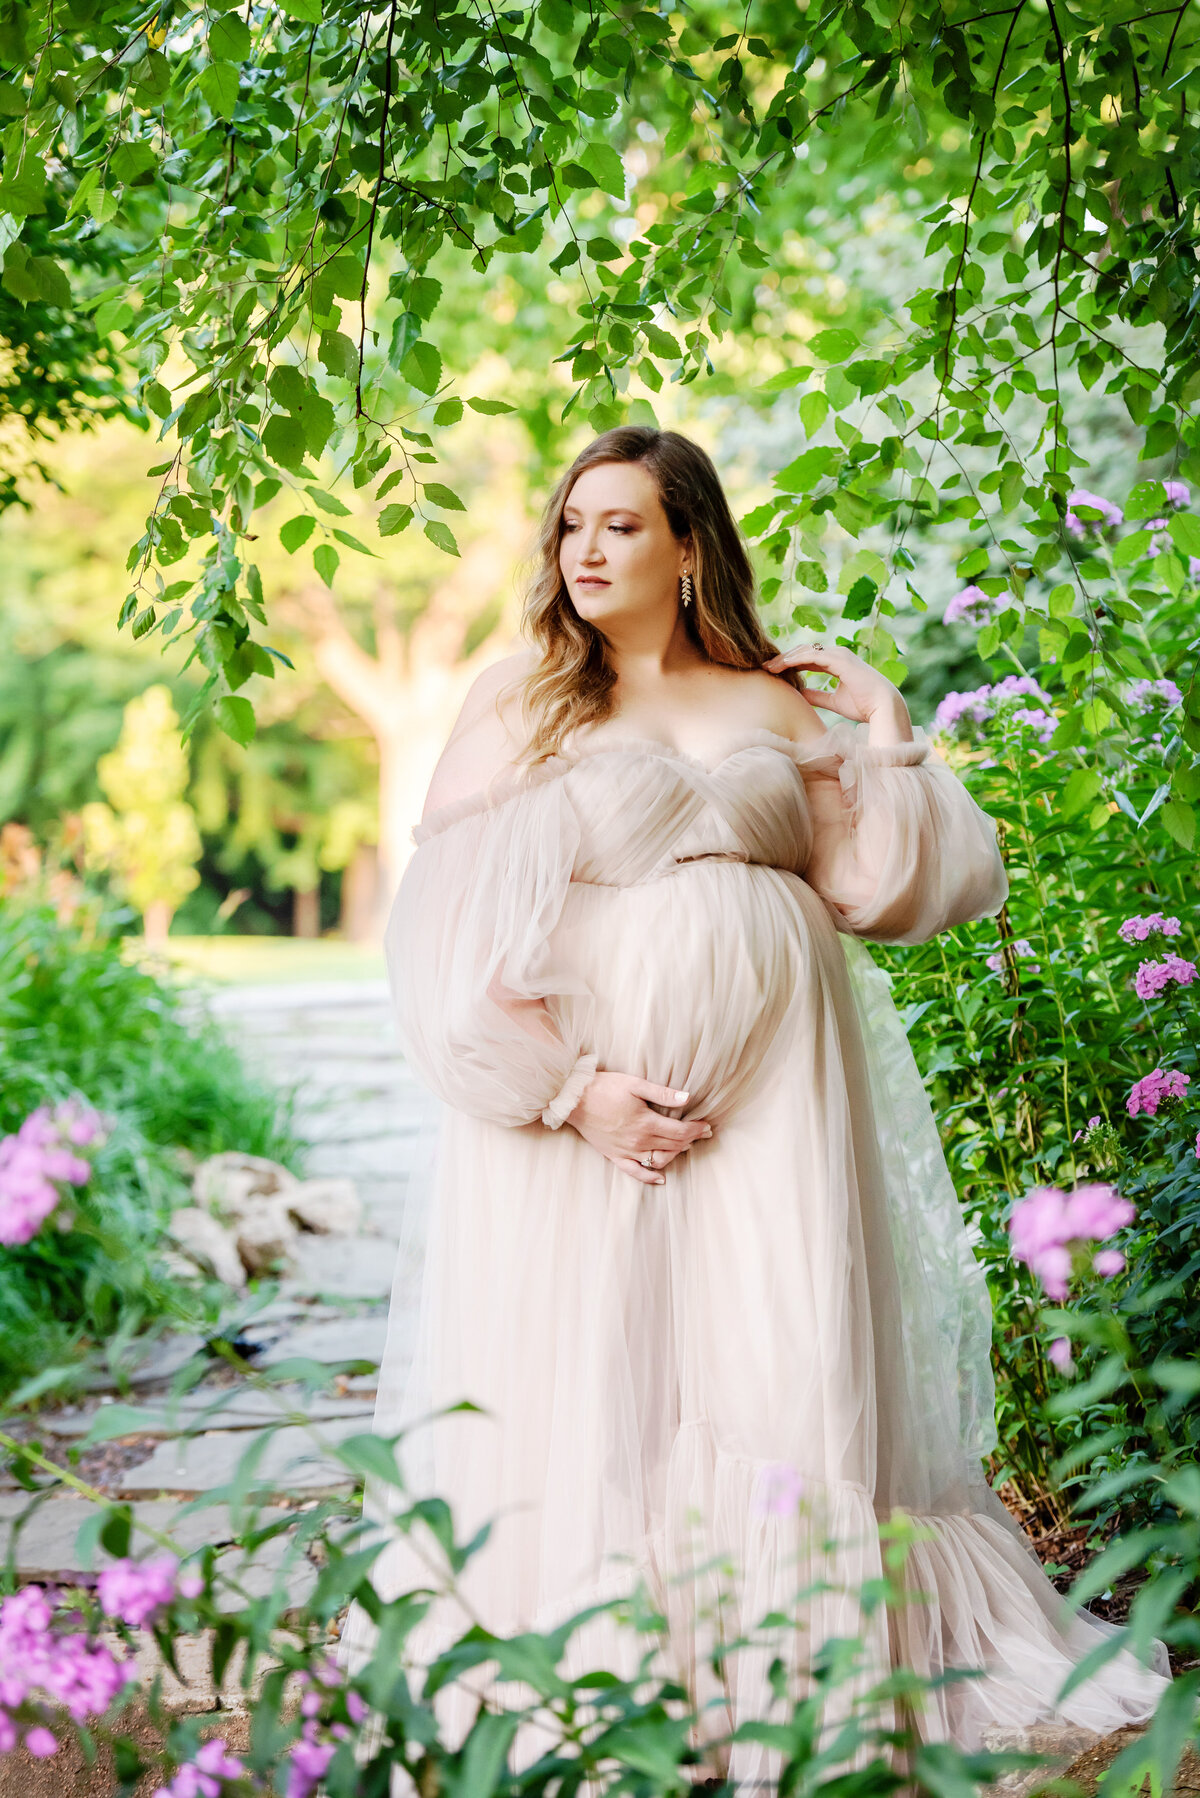 st-louis-maternity-photographer-pregnant-mother-in-flowy-white-gown-holding-belly-standing-in-garden